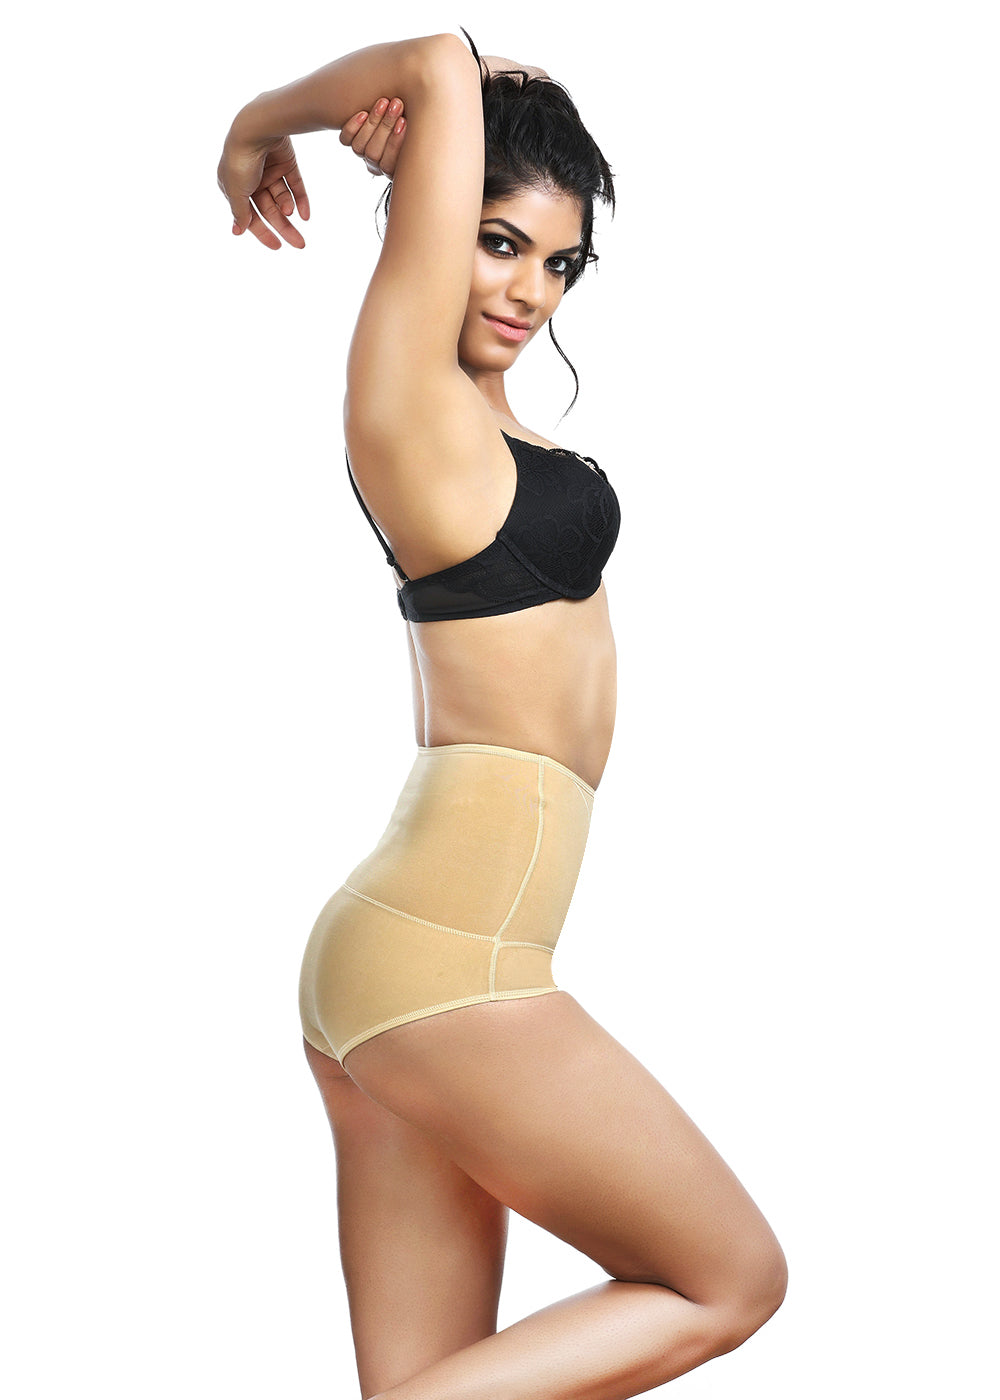 Adorna Shapewear - Check out our 3-in-1 shaper for tummy, hips and thighs.  Buy this one and you are sorted for these areas. They are also stylish,  manufactured using premium skin-safe materials